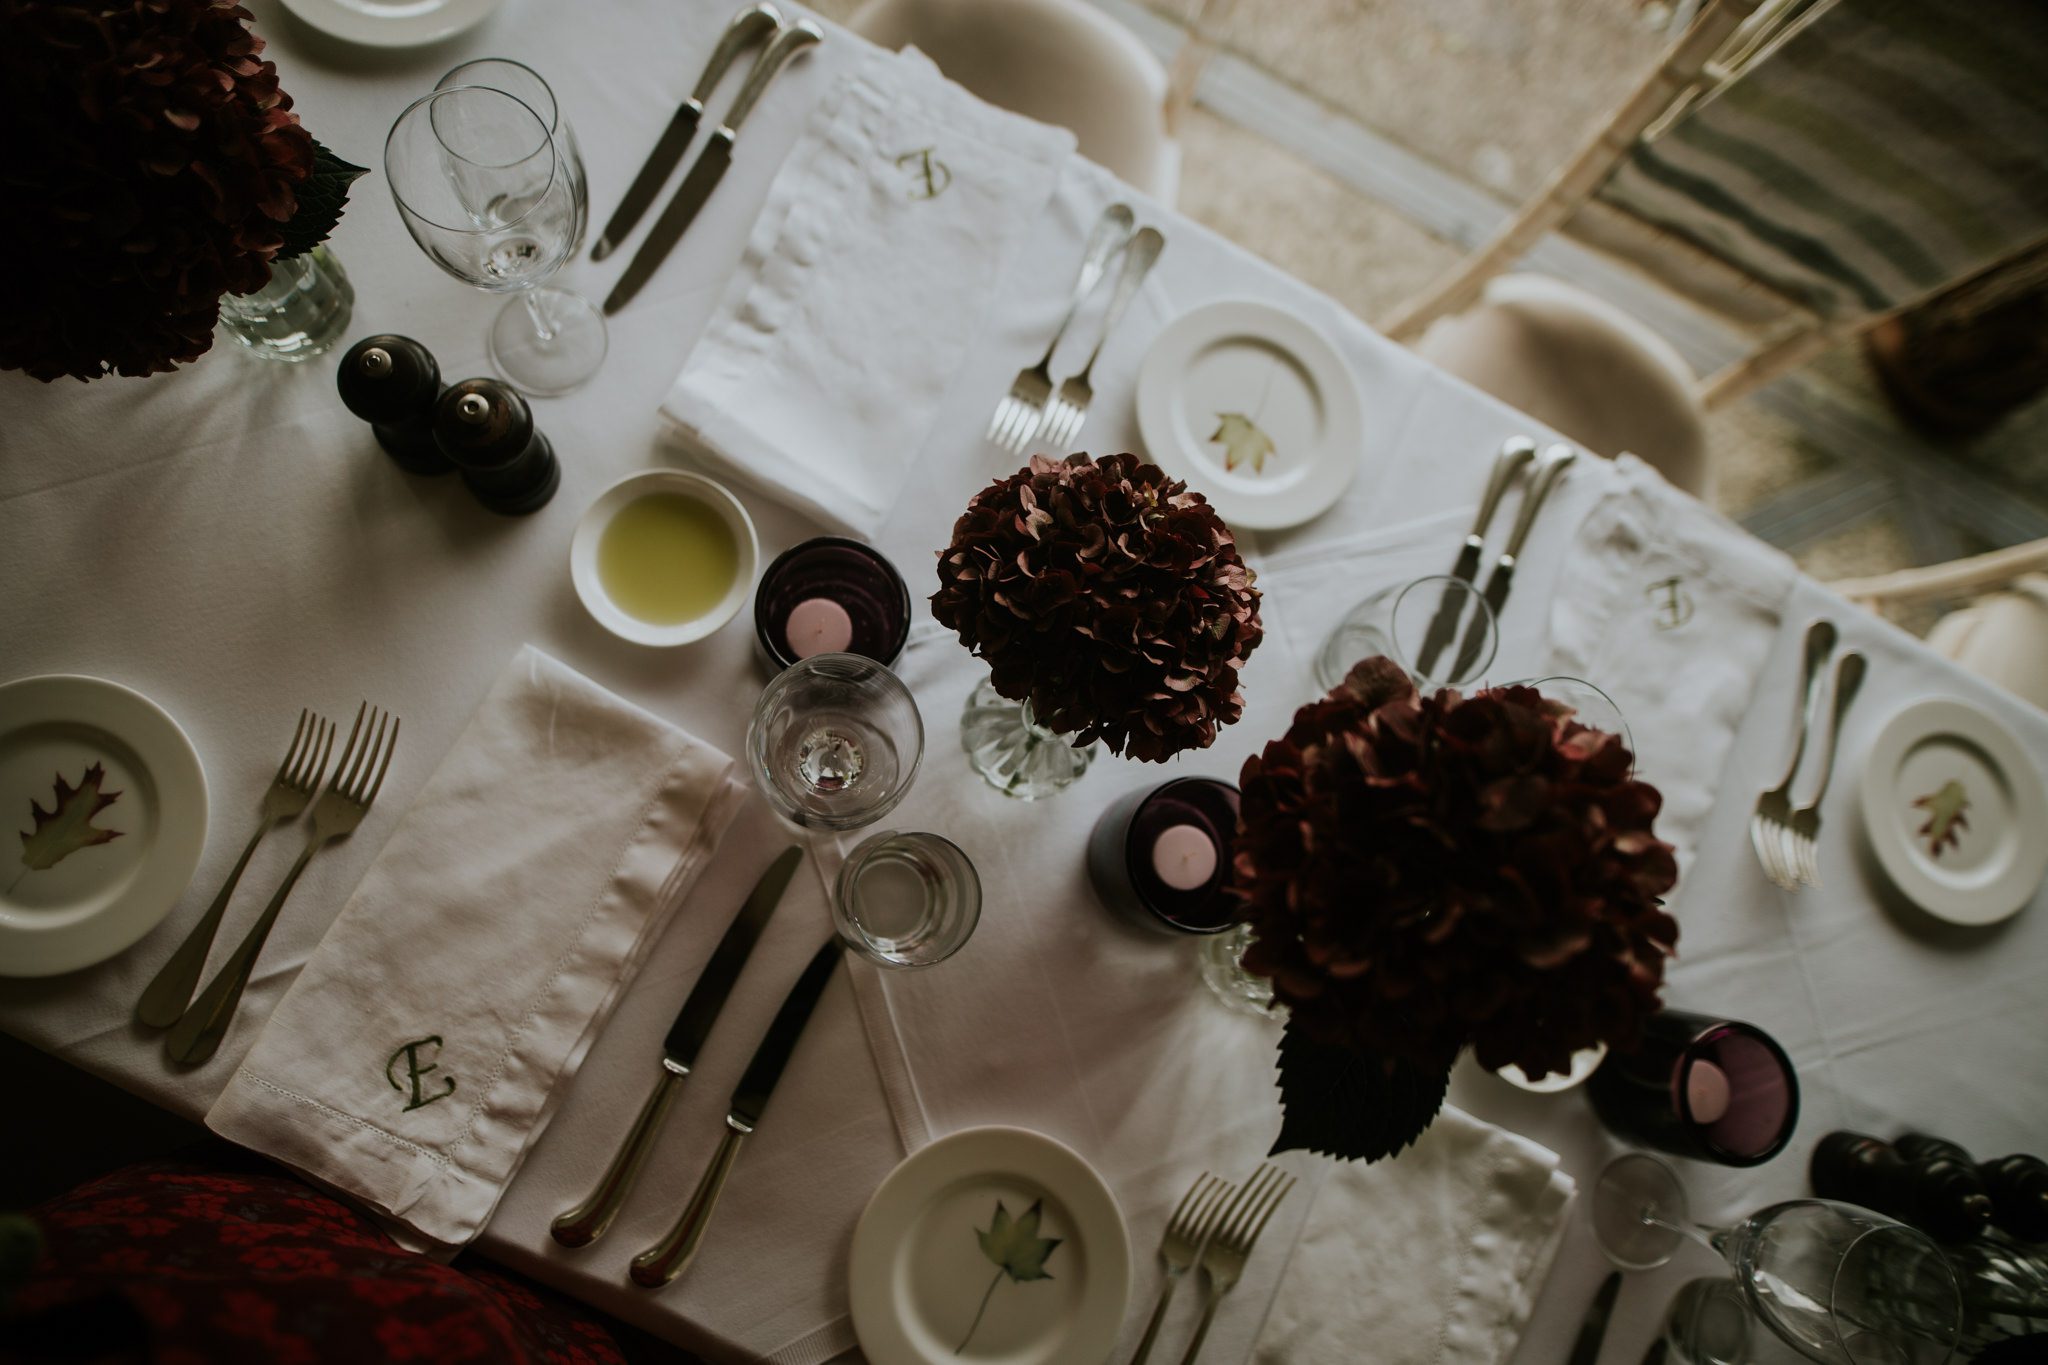 The table set for wedding breakfast at Hotel Endsleigh